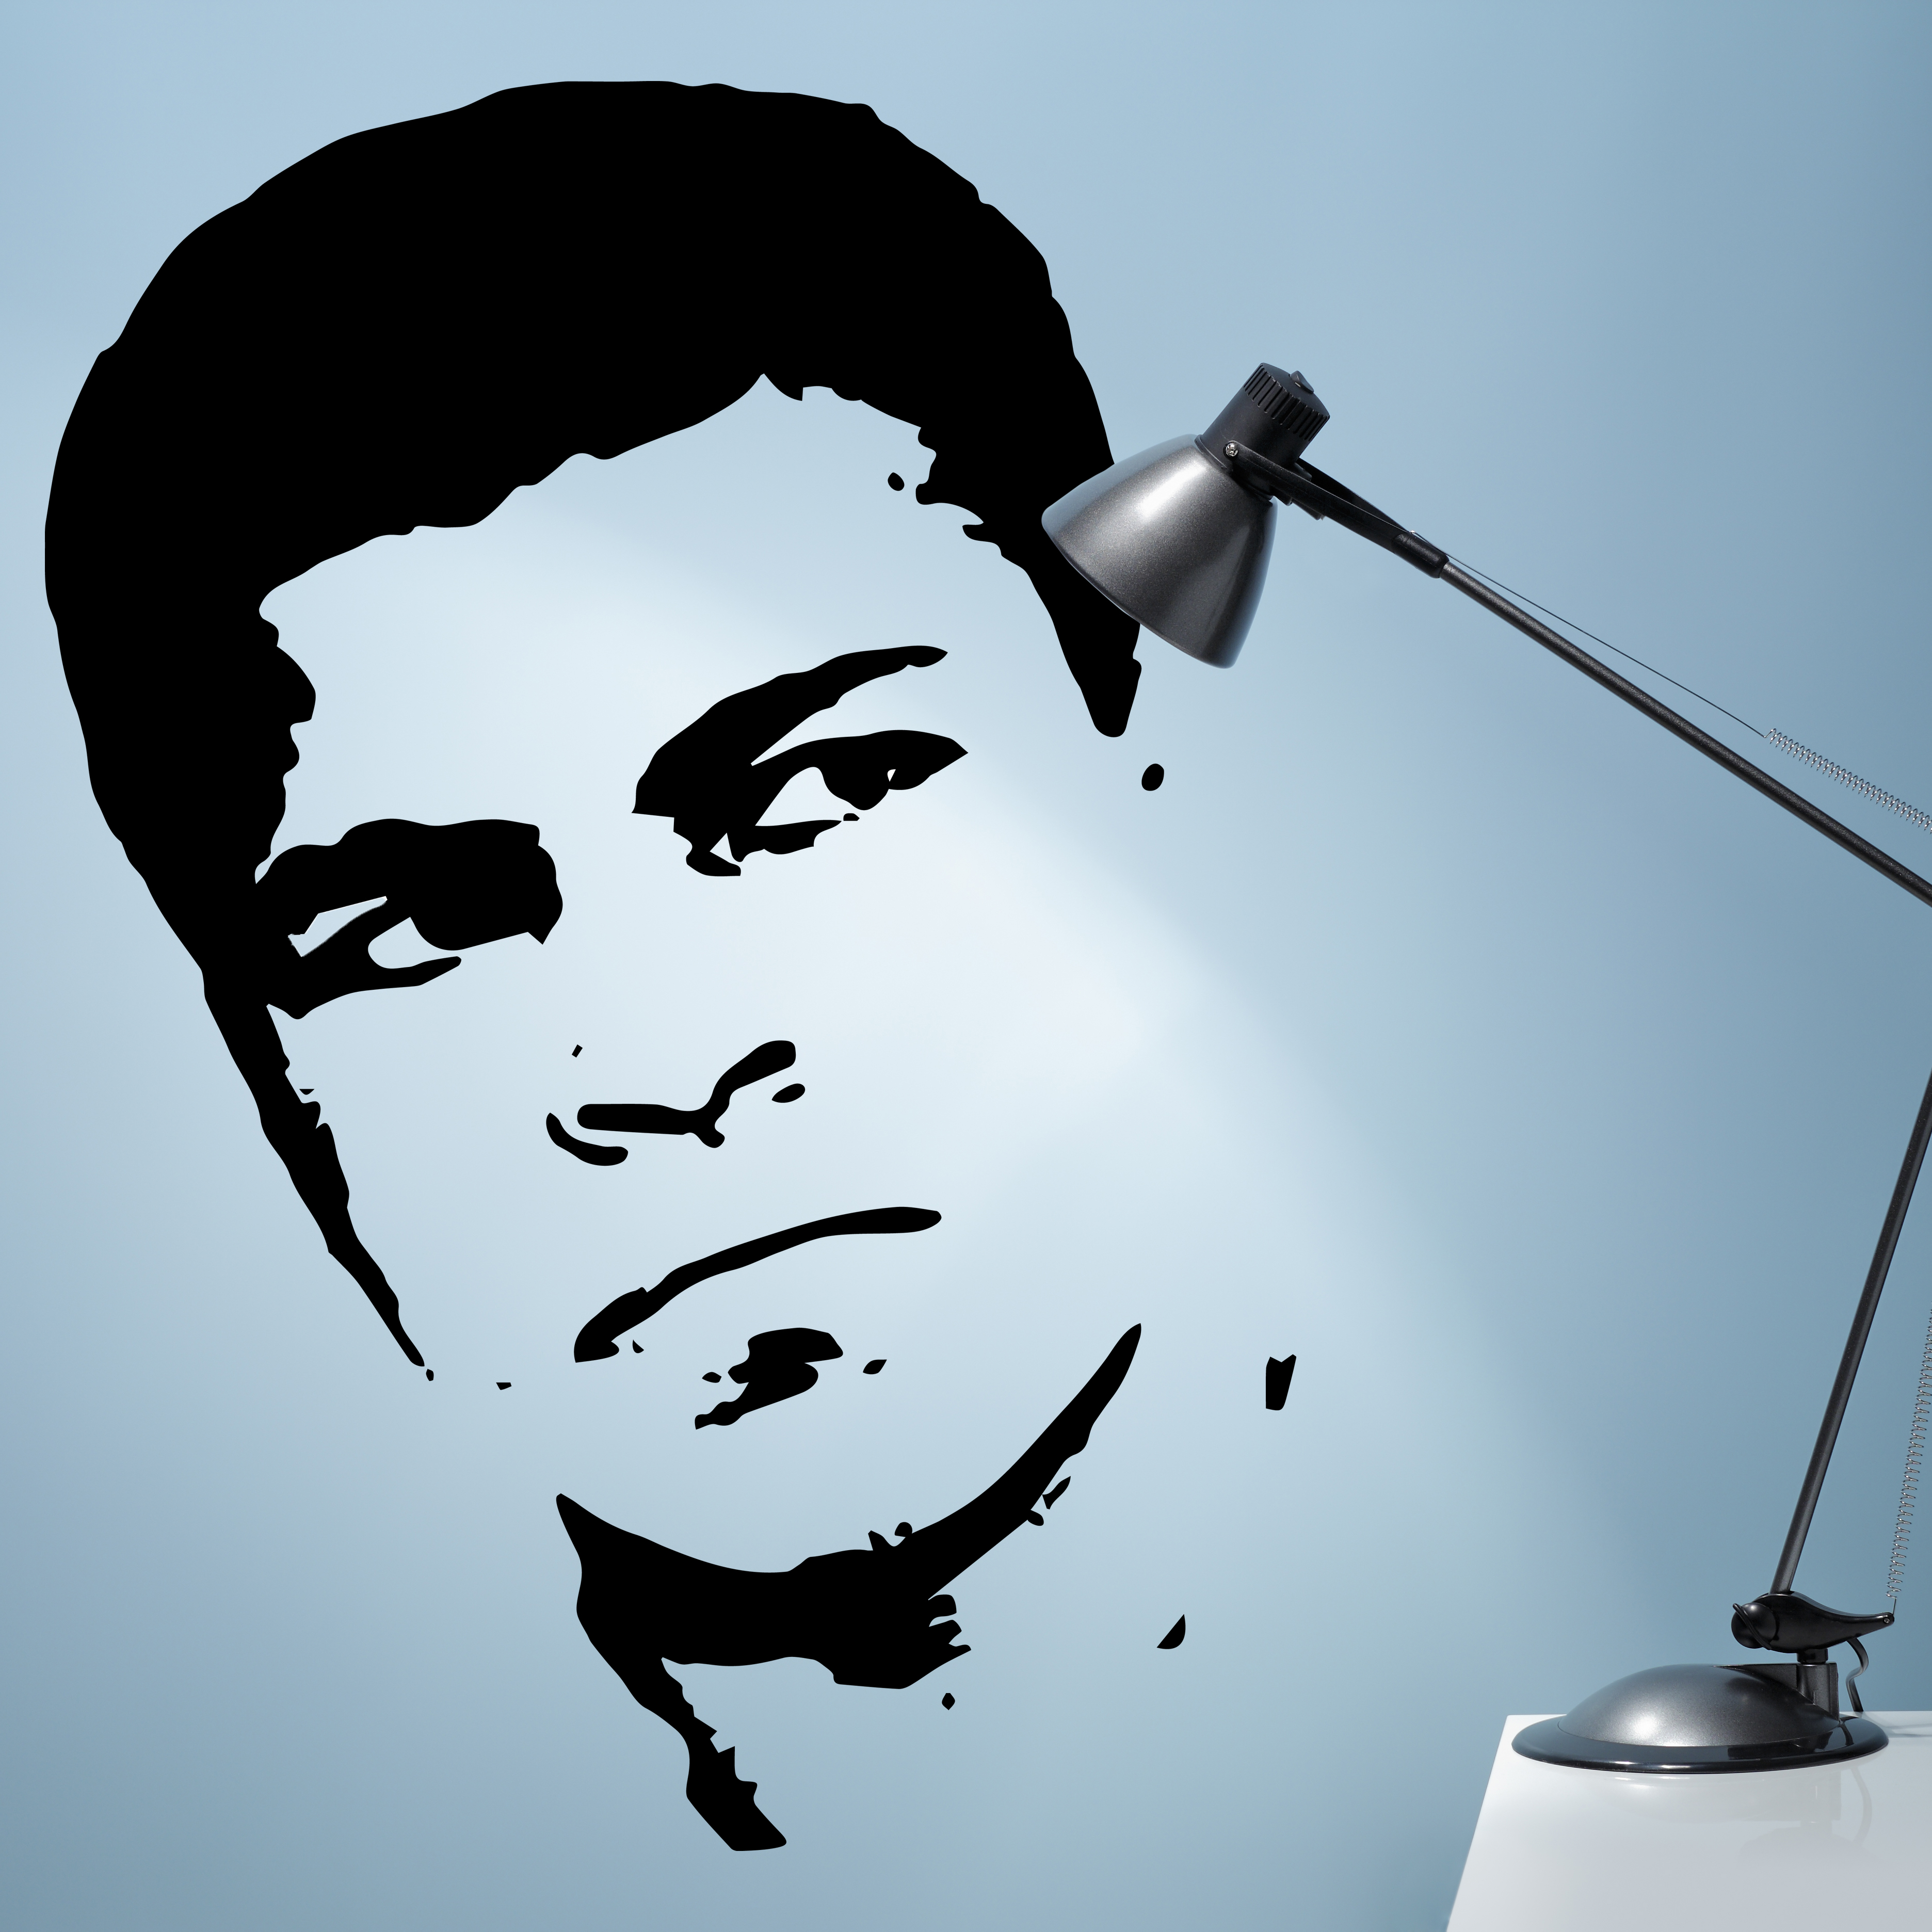 Muhammed-Ali-wall decals and posters to celebrate Black History Month and inspire students in the classroom